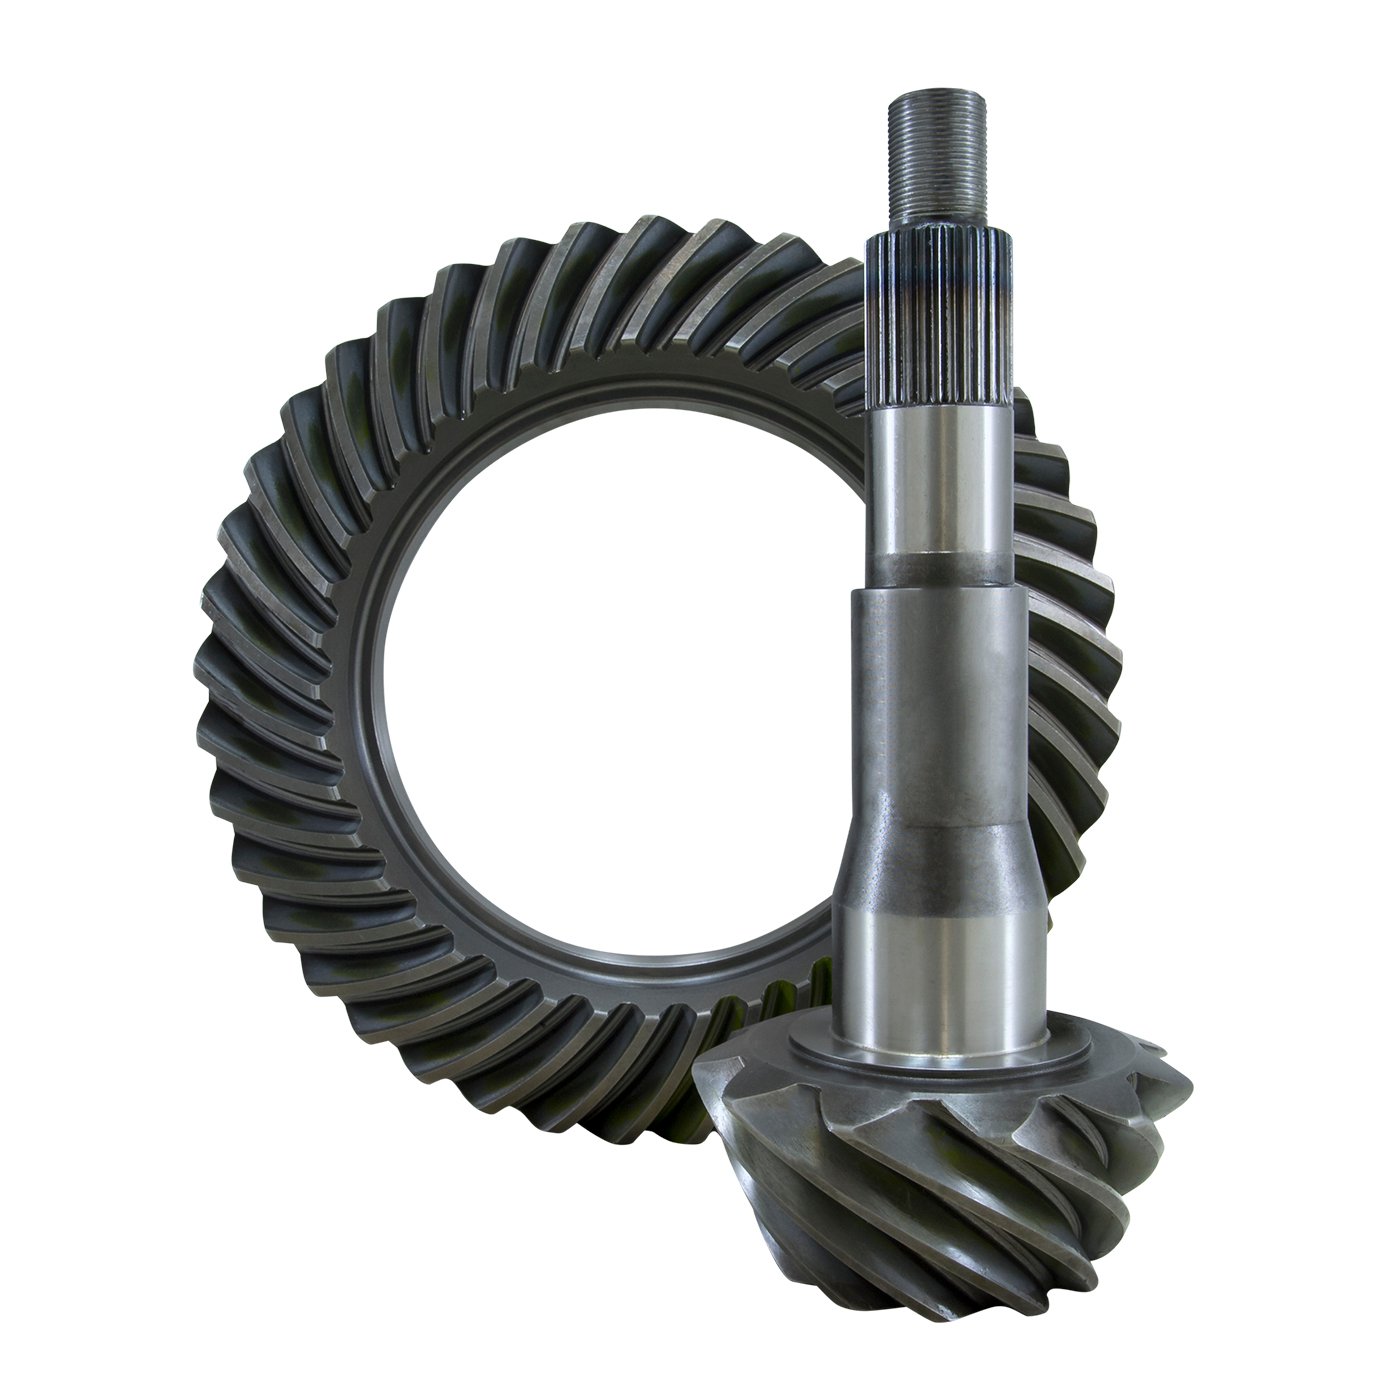 USA Standard 36432 Ring & Pinion Gear Set, For '10 & Down Ford 10.5 in., 4.30 Ratio.